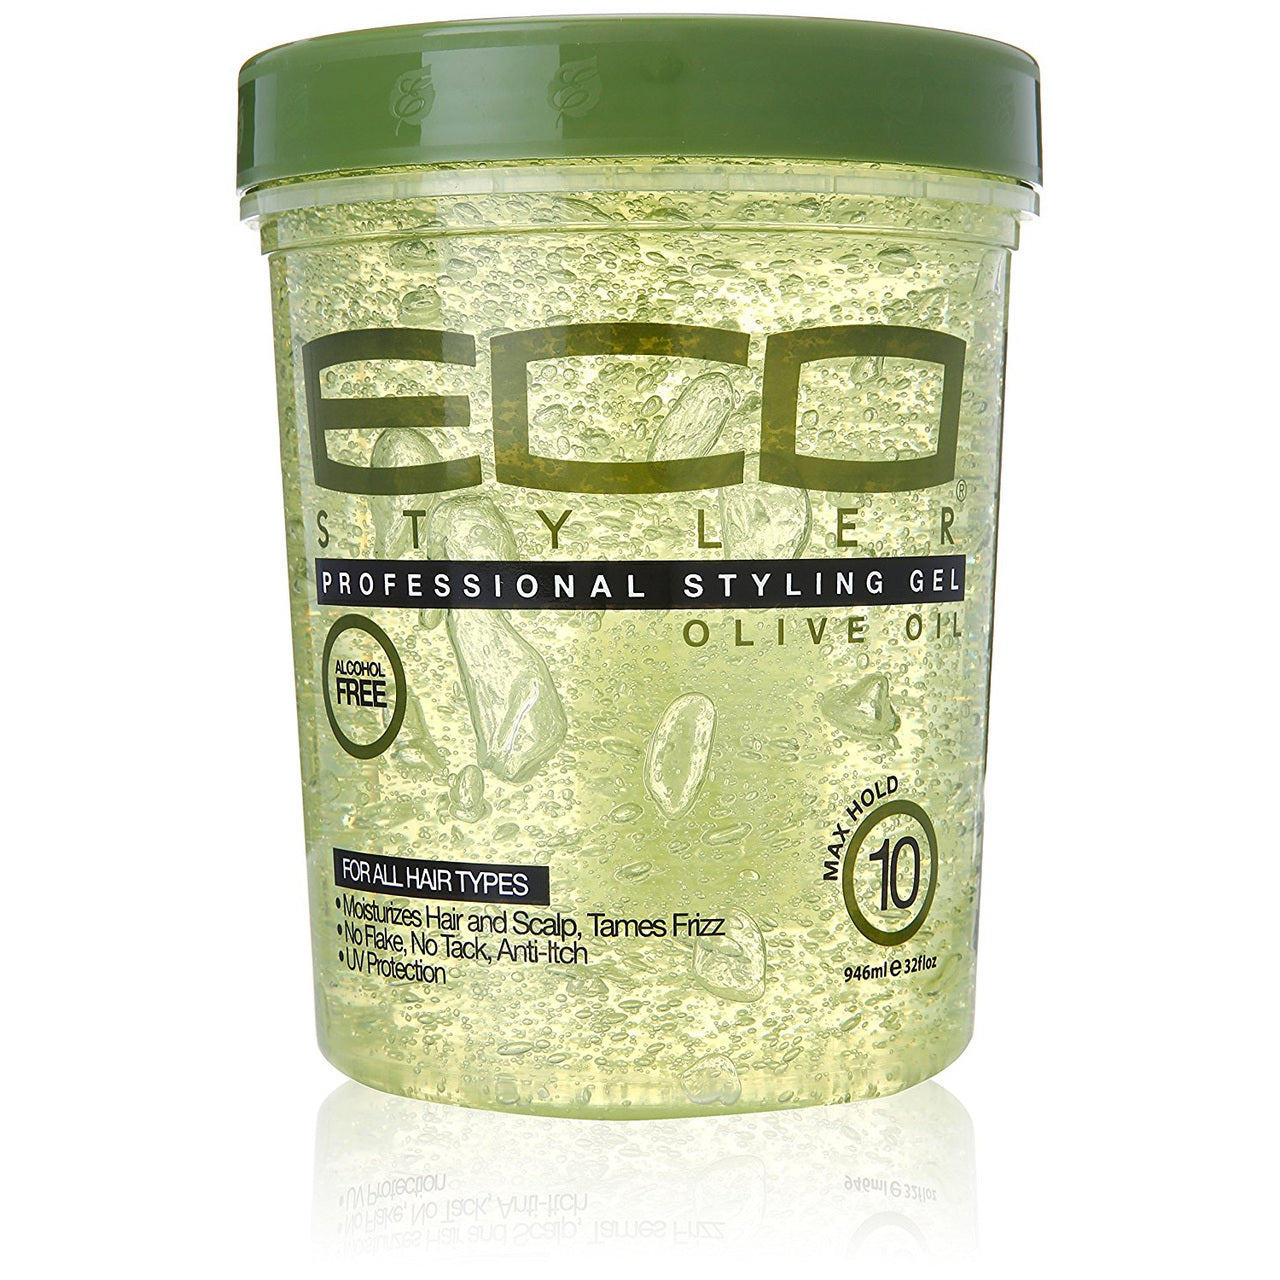 Eco Style Professional Styling Gel, Olive Oil, 32 Oz –